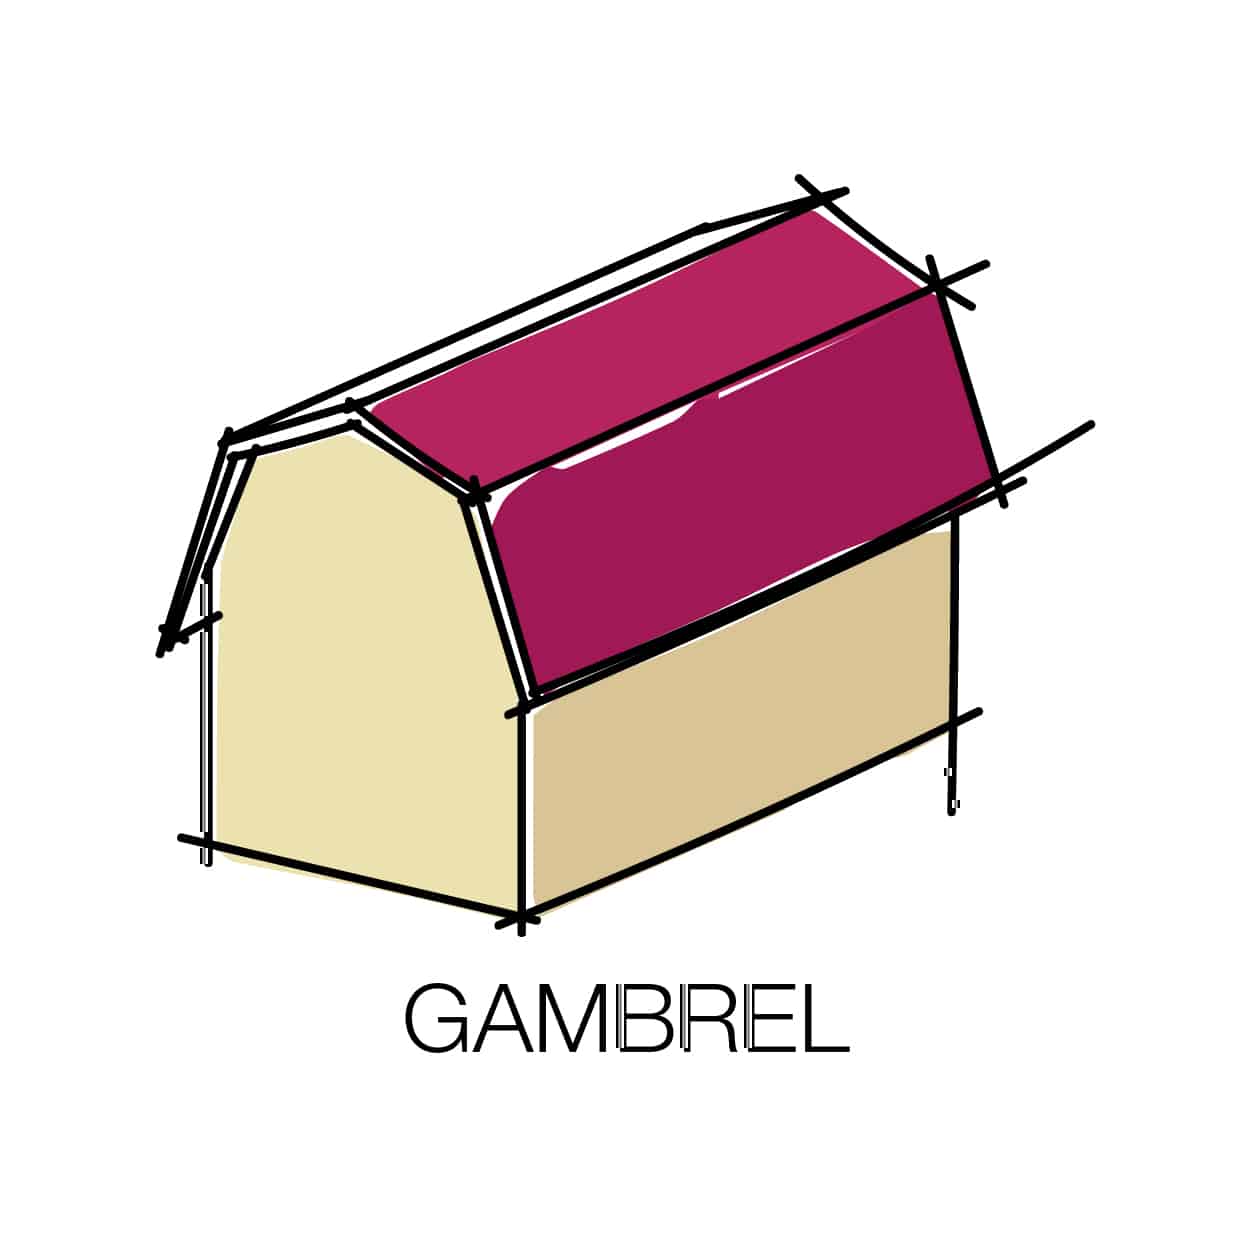 Gambrel roofs gable roof